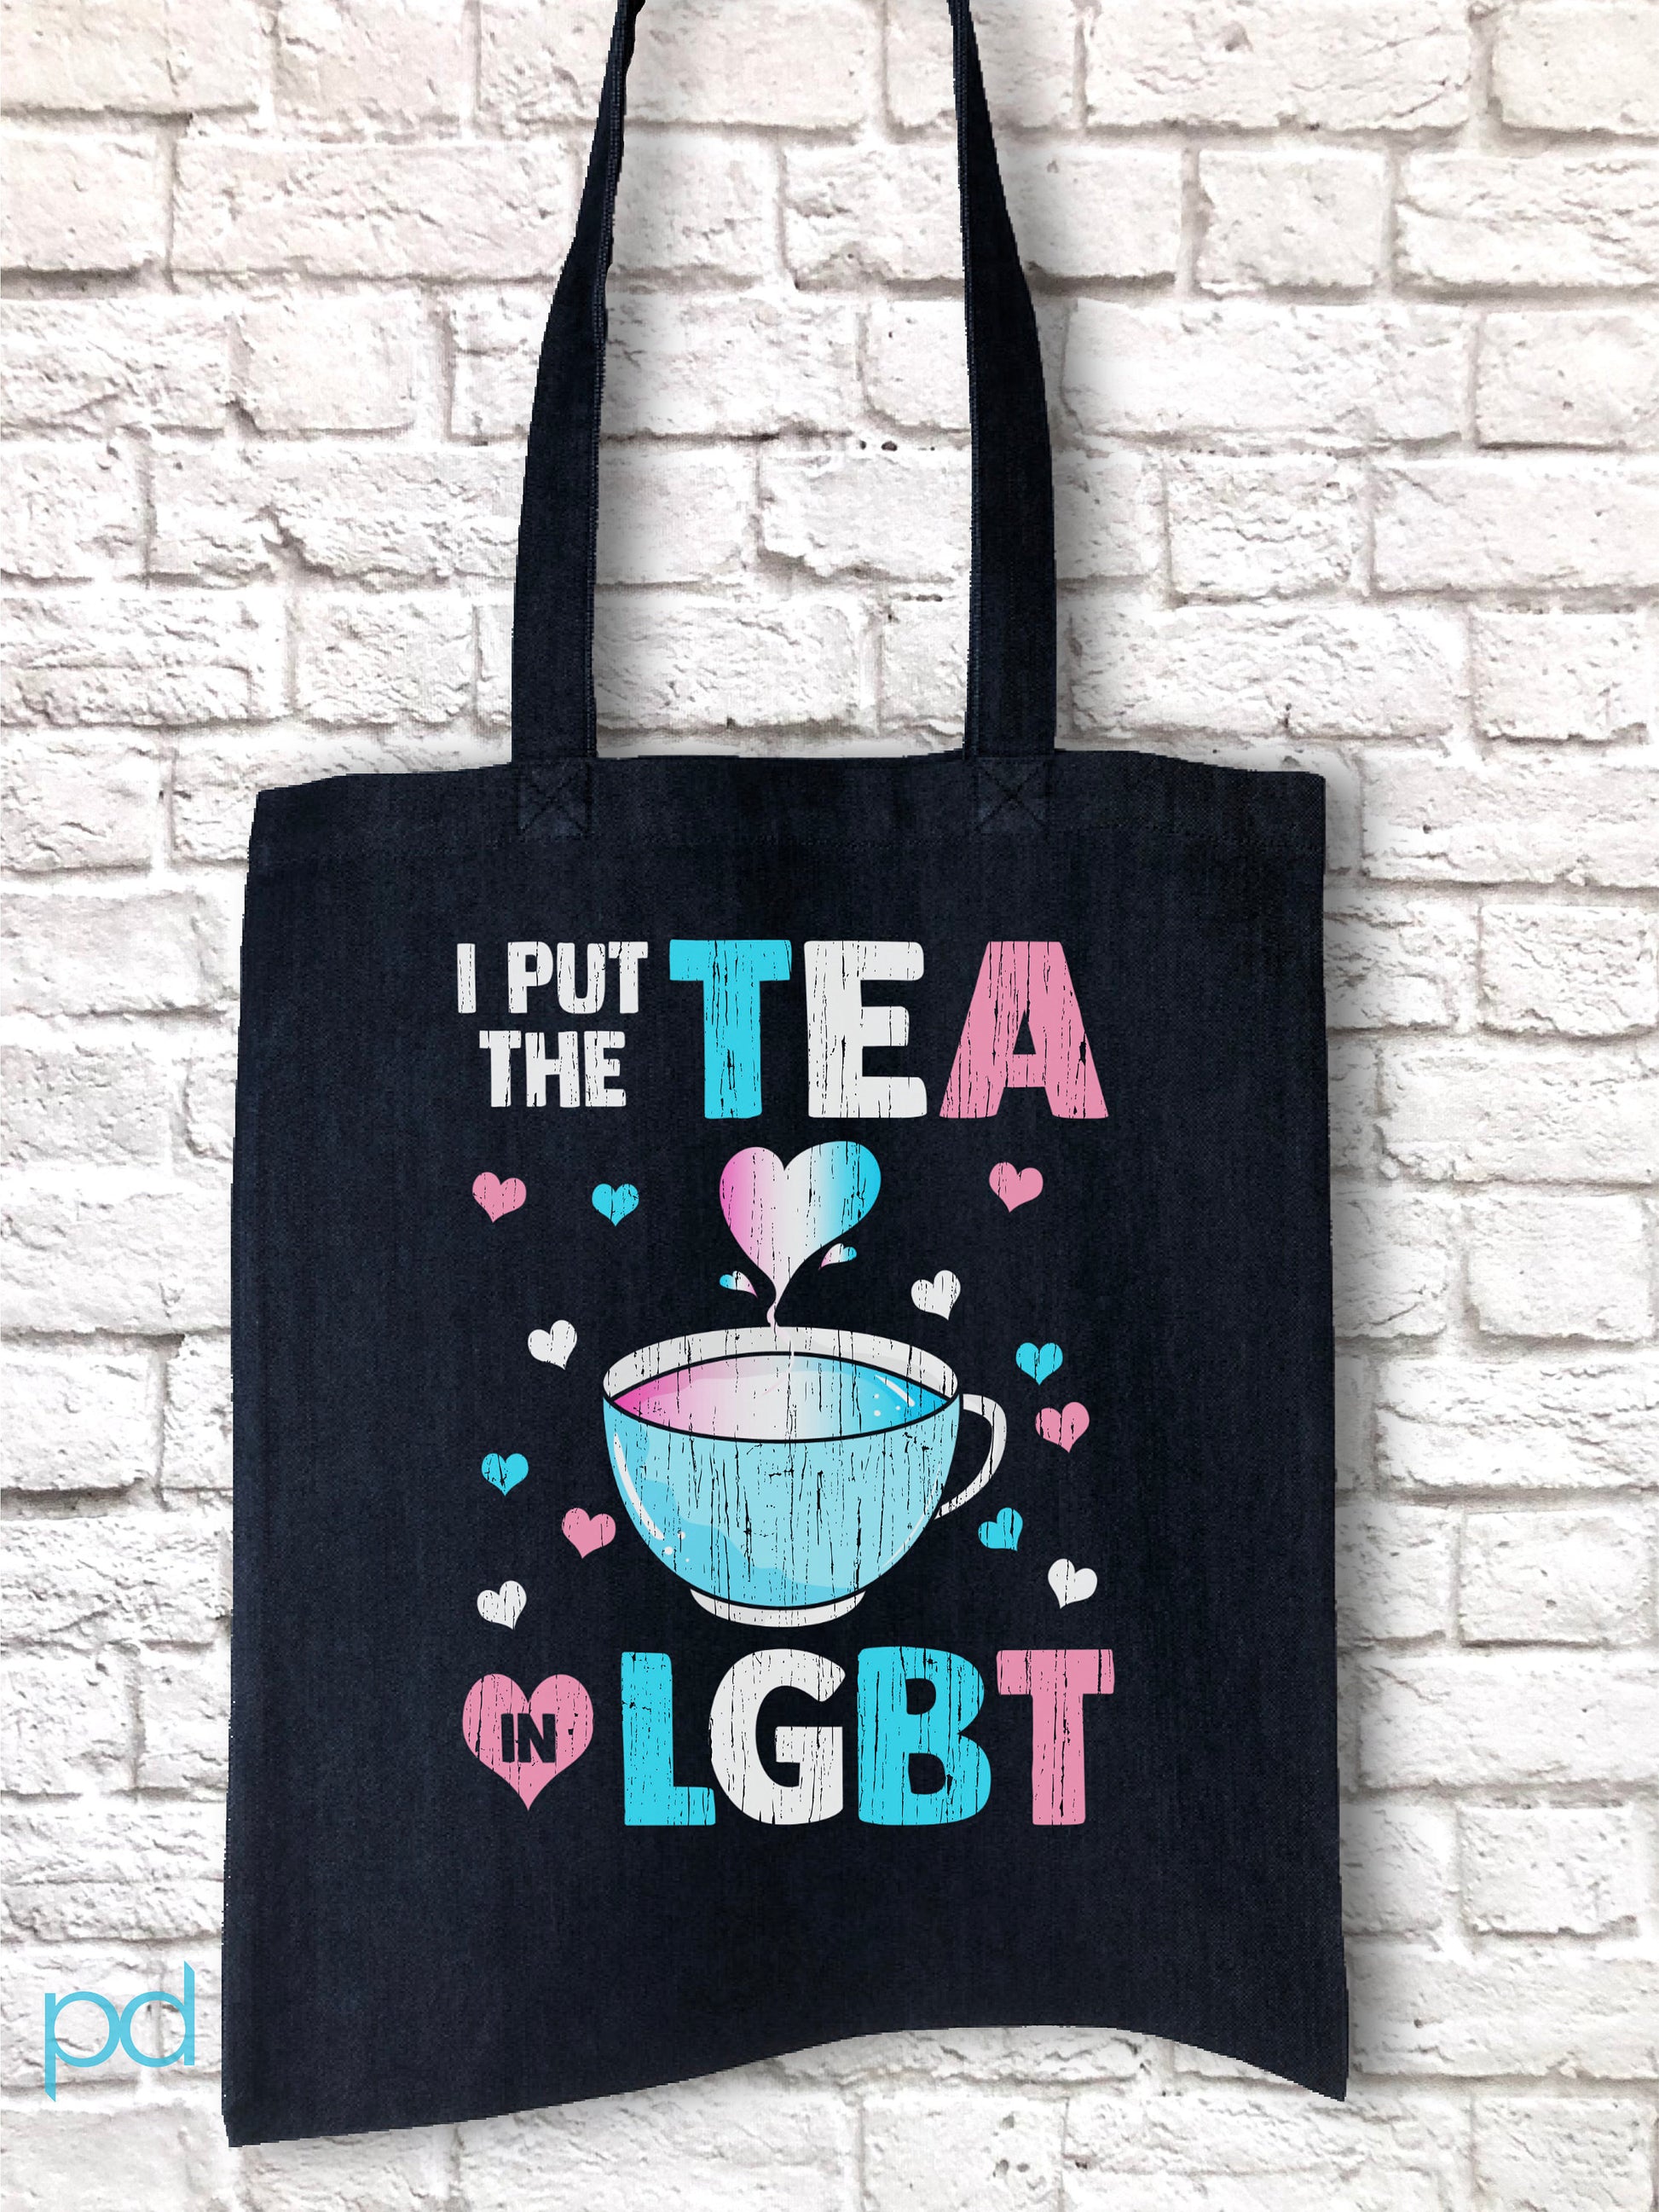 I Put The Tea In LGBT Tote Bag, Funny Trans Gift Idea, Humorous Transgender Reusable Shopping Carrier Bag